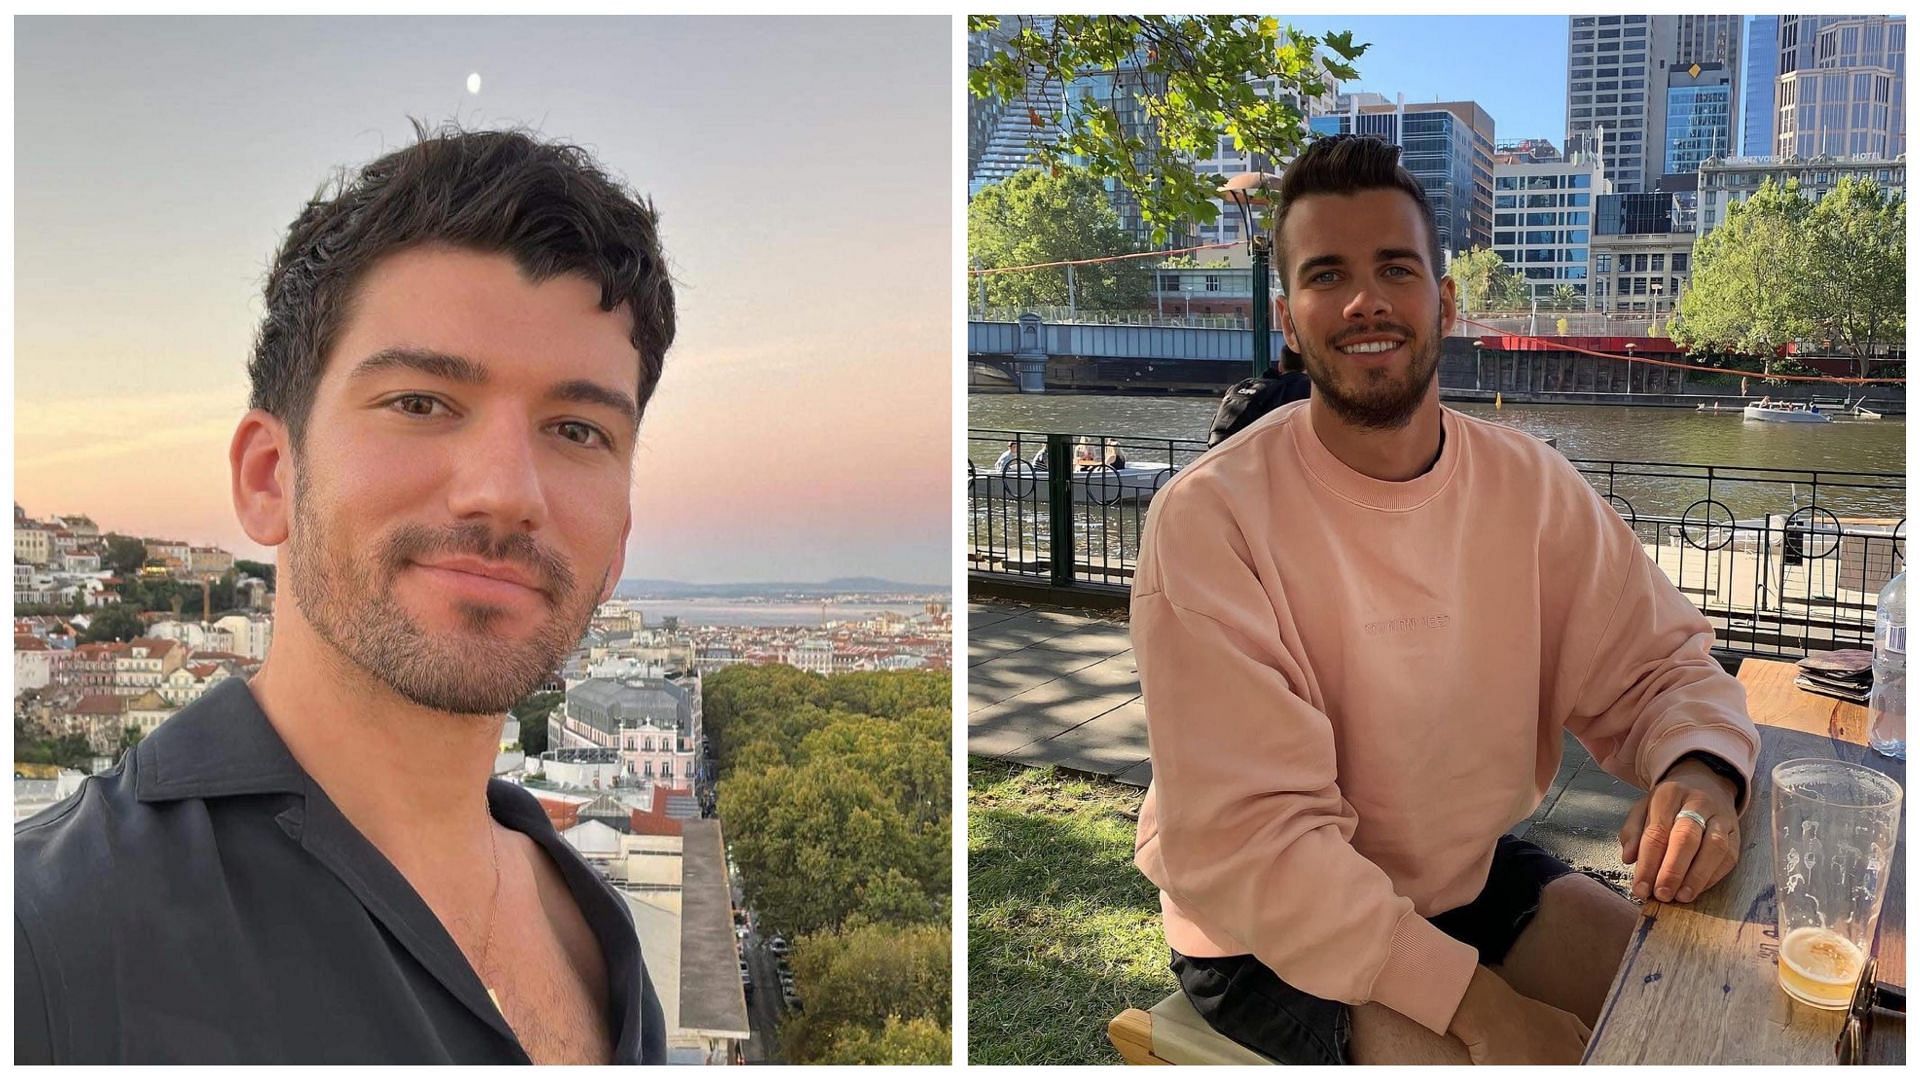 NSW police officer Beau Lamarre charged with the murders of Luke Davies (left) and Jesse Baird (right) (Image via @nswpolice/X and @jessebairddd/Instagram)  